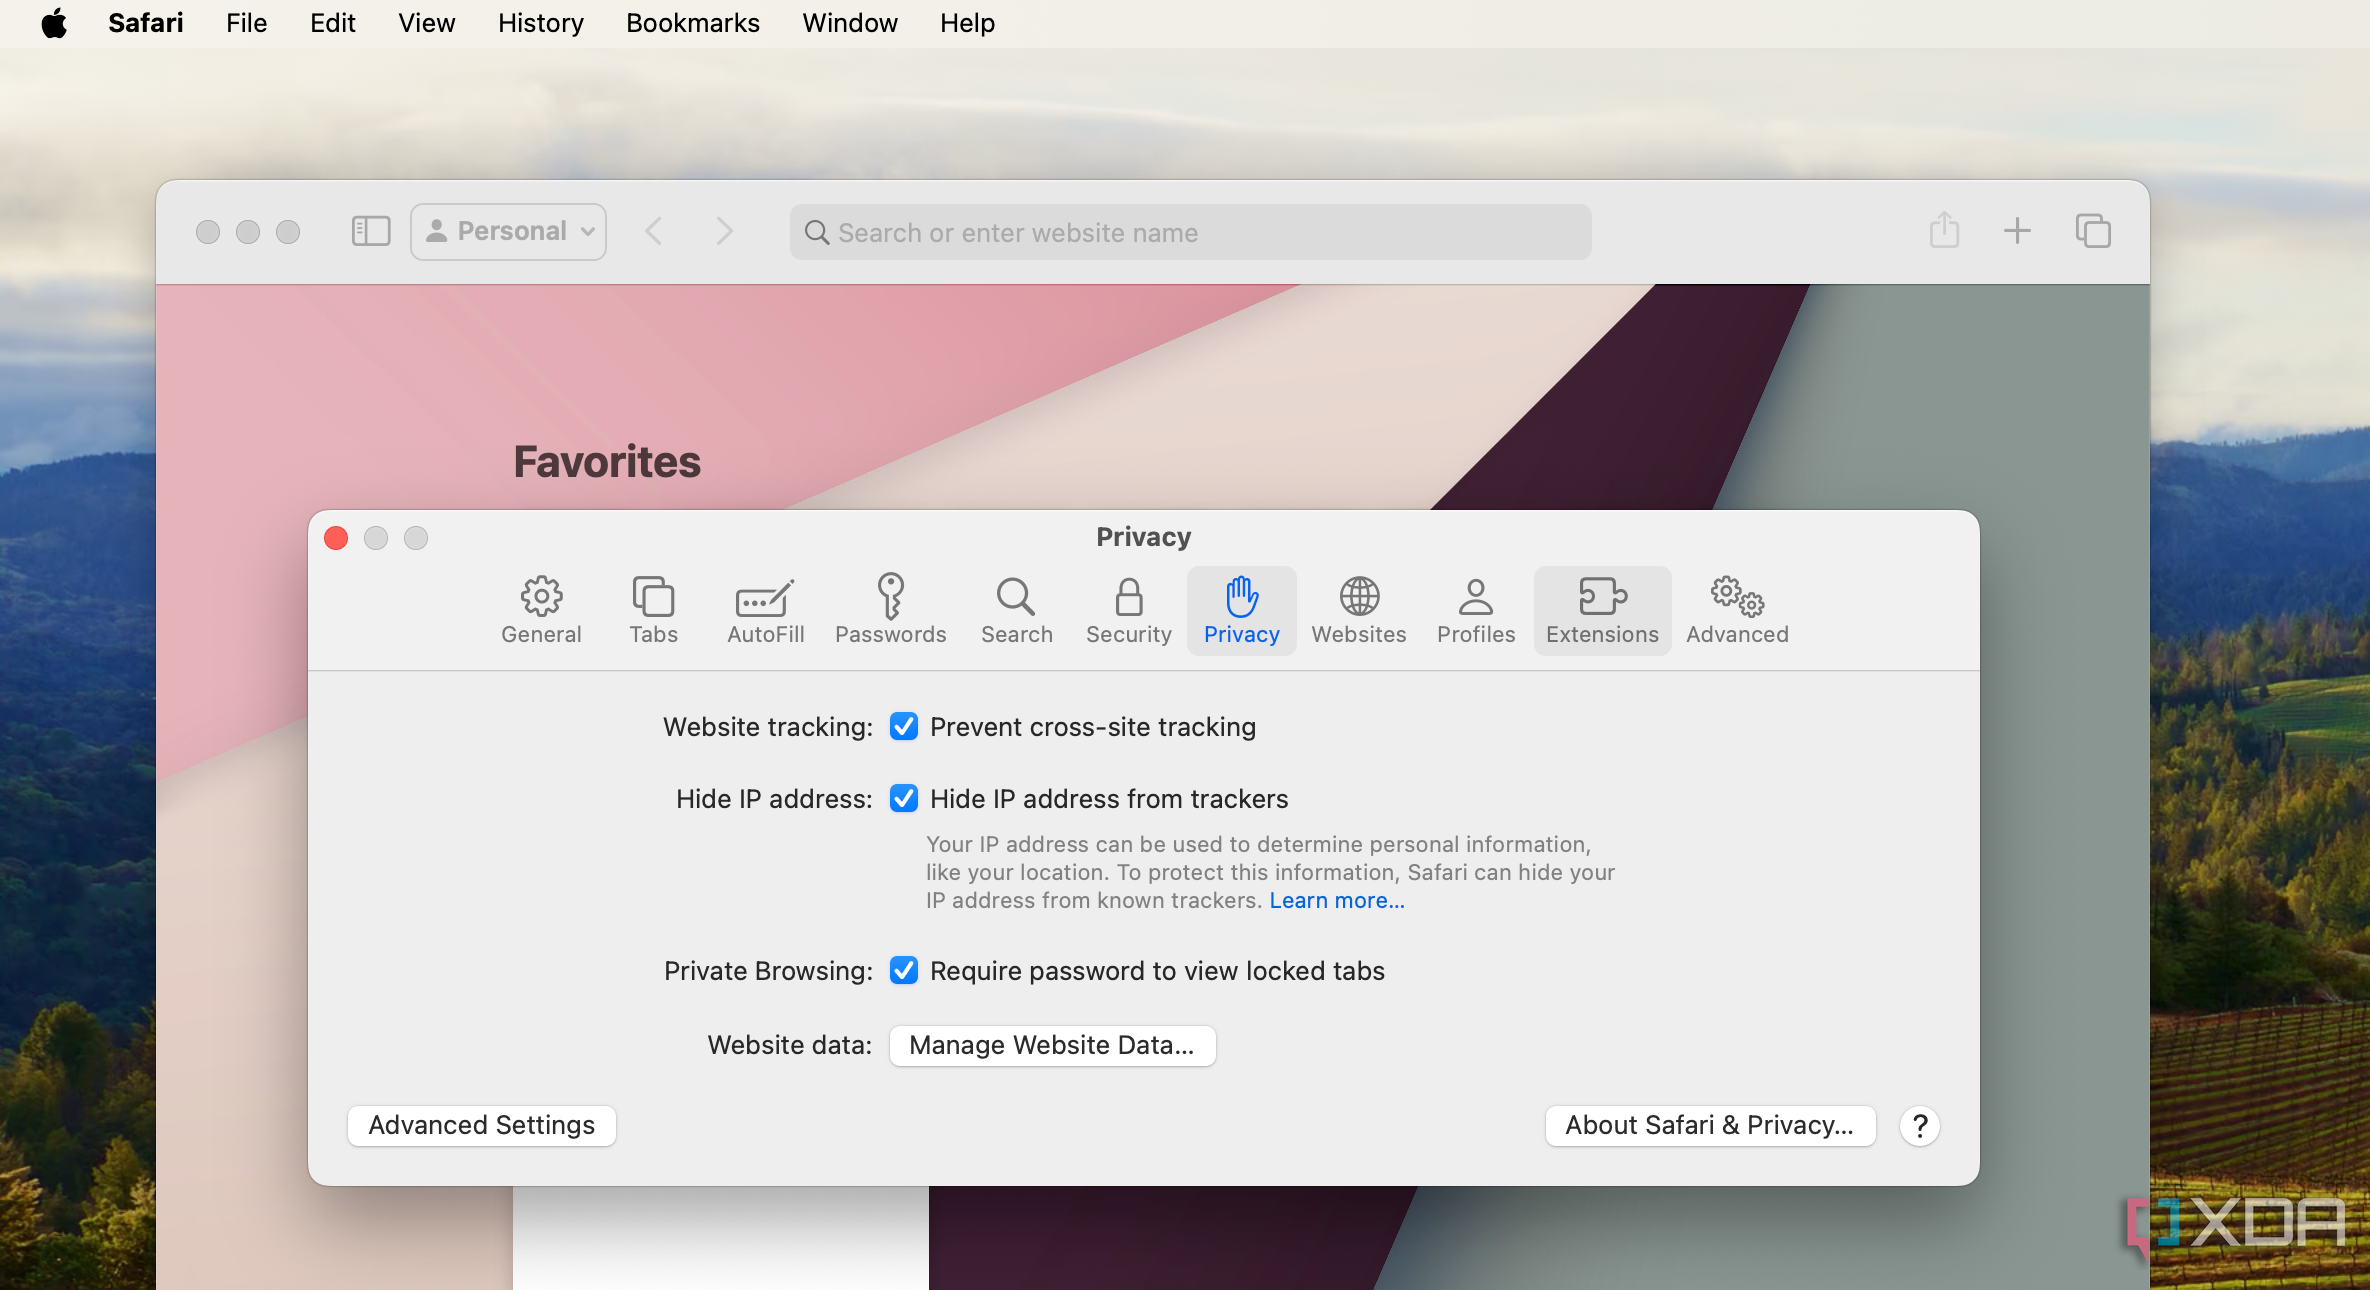 All of Safari's settings options open on the screen